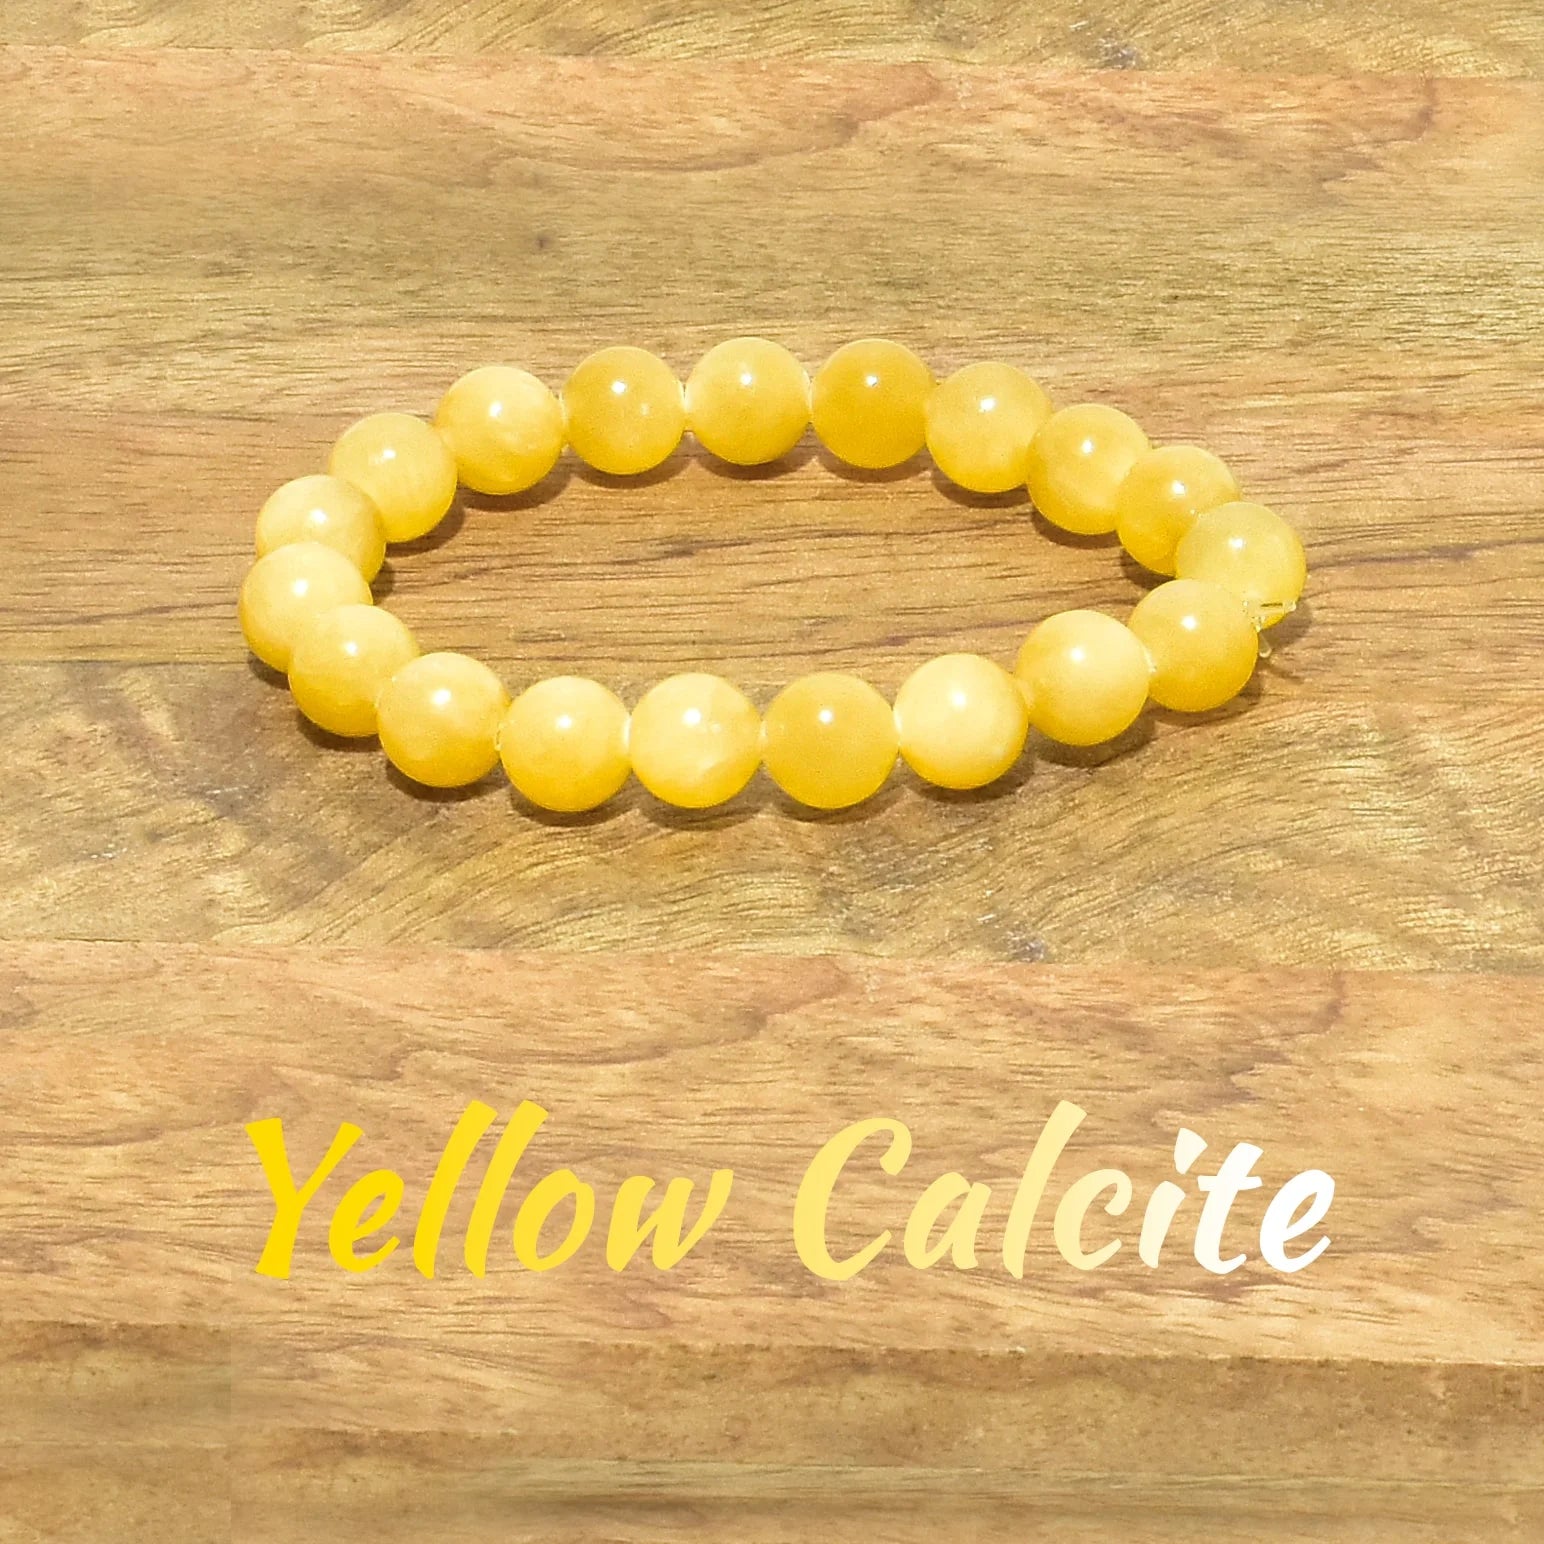 Yellow Calcite Natural Crystal Stone Bracelet